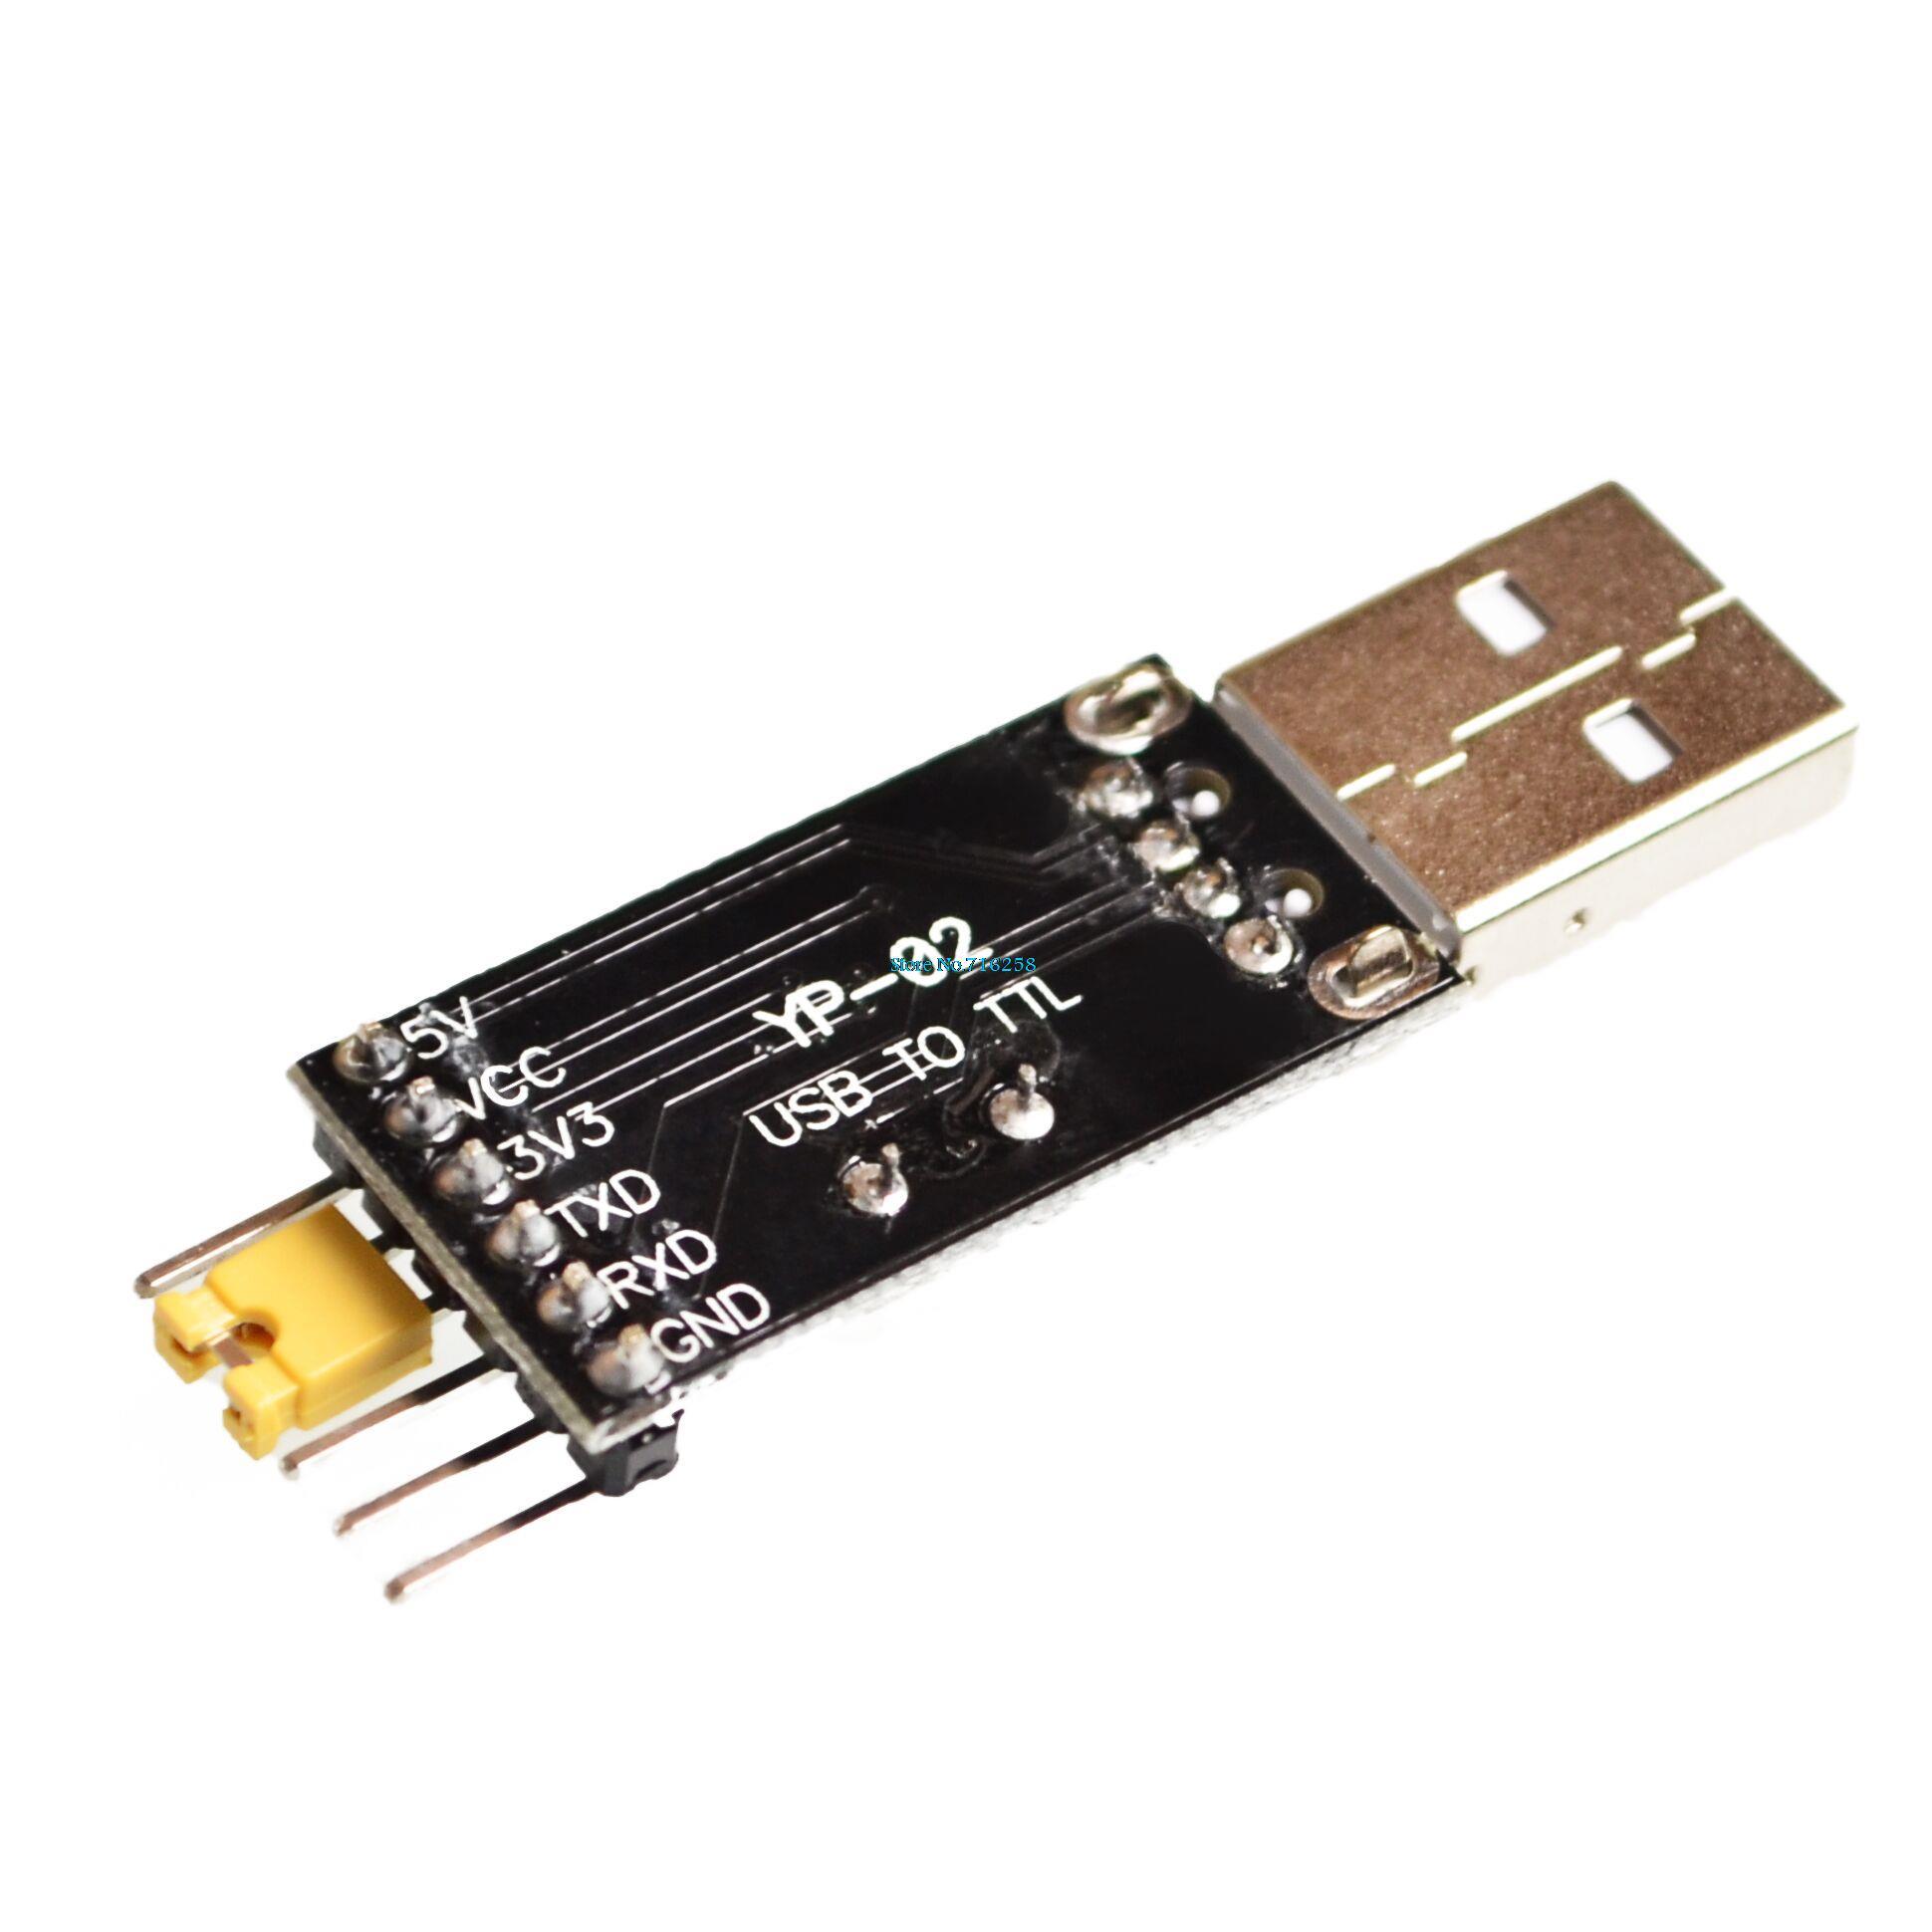 5pcs-lot-CH340-module-USB-to-TTL-CH340G-upgrade-download-a-small-wire-brush-plate-STC-microcontroller-board-USB-to-serial